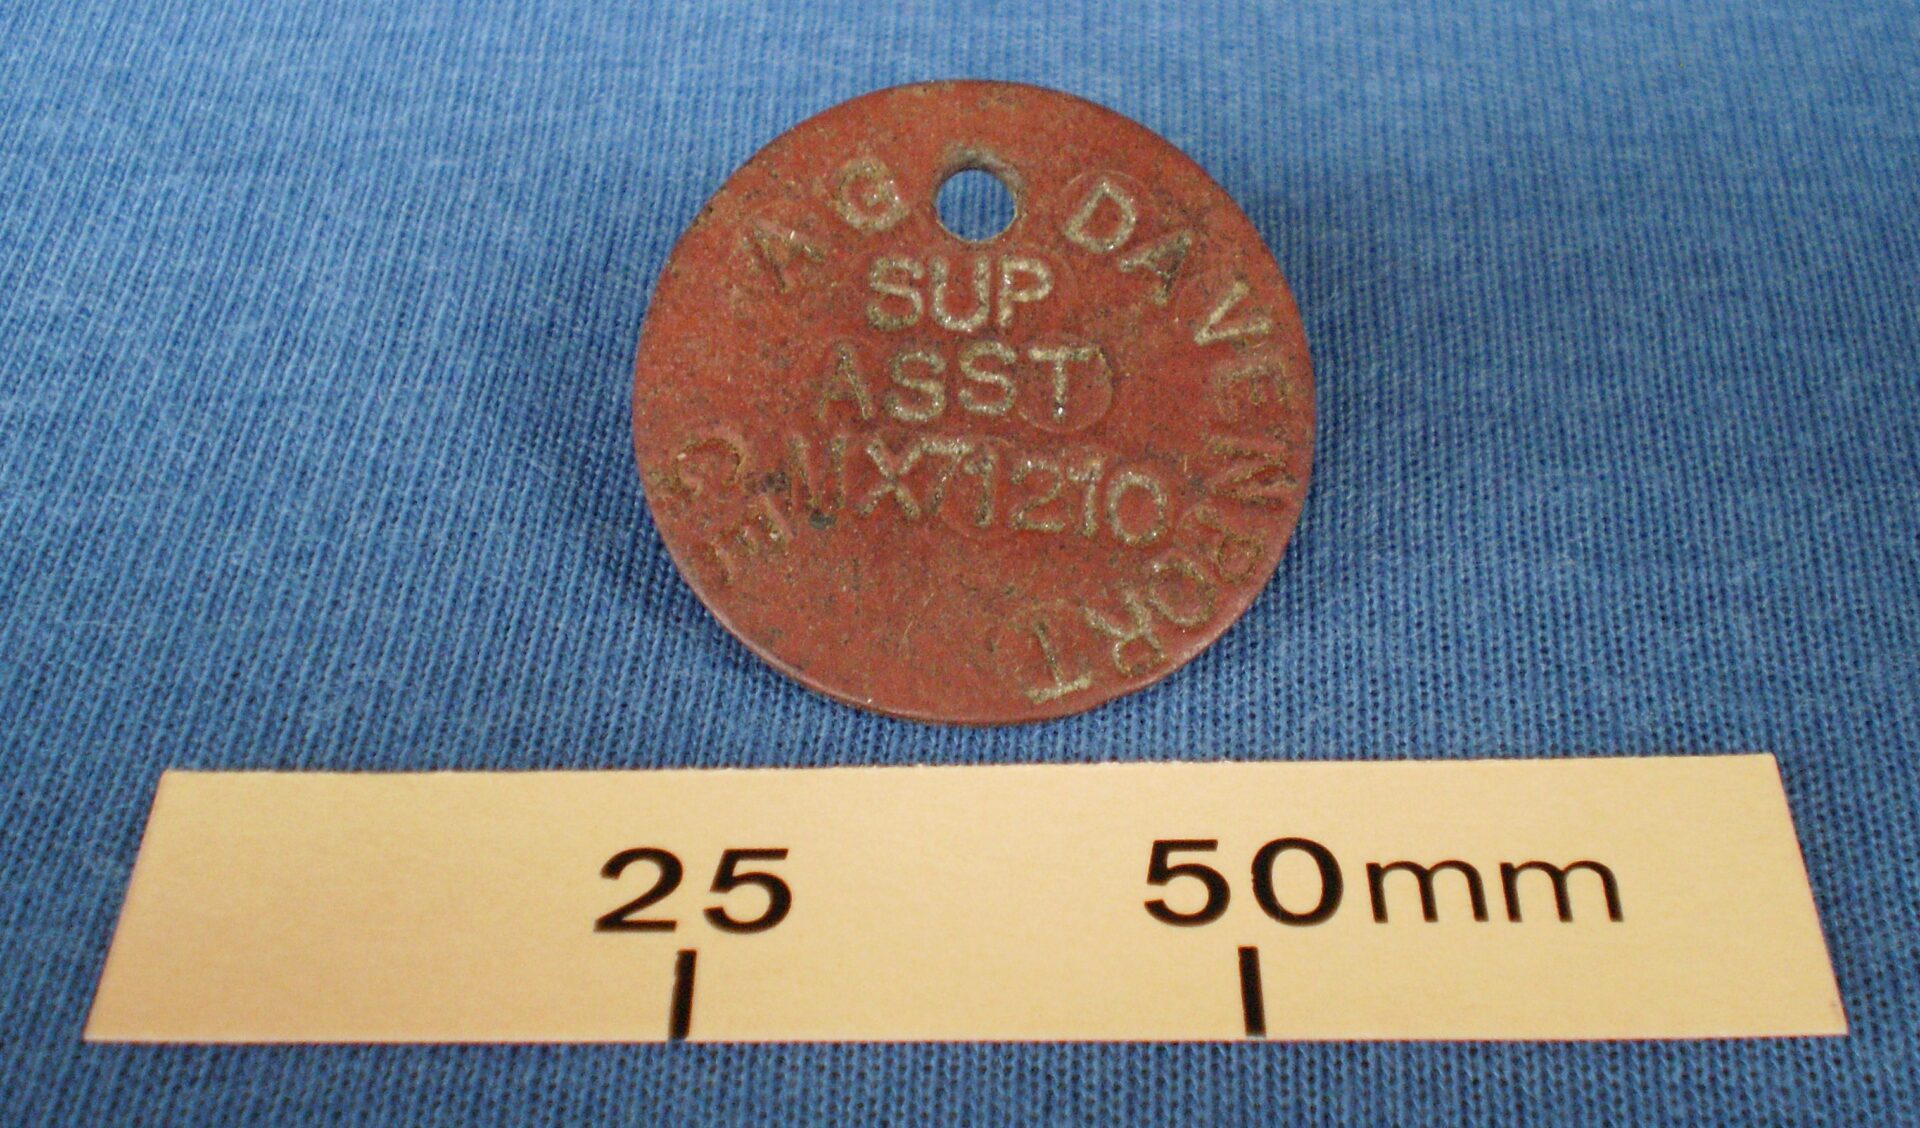 AG Davenport Supply Assistant identification tag during WW2